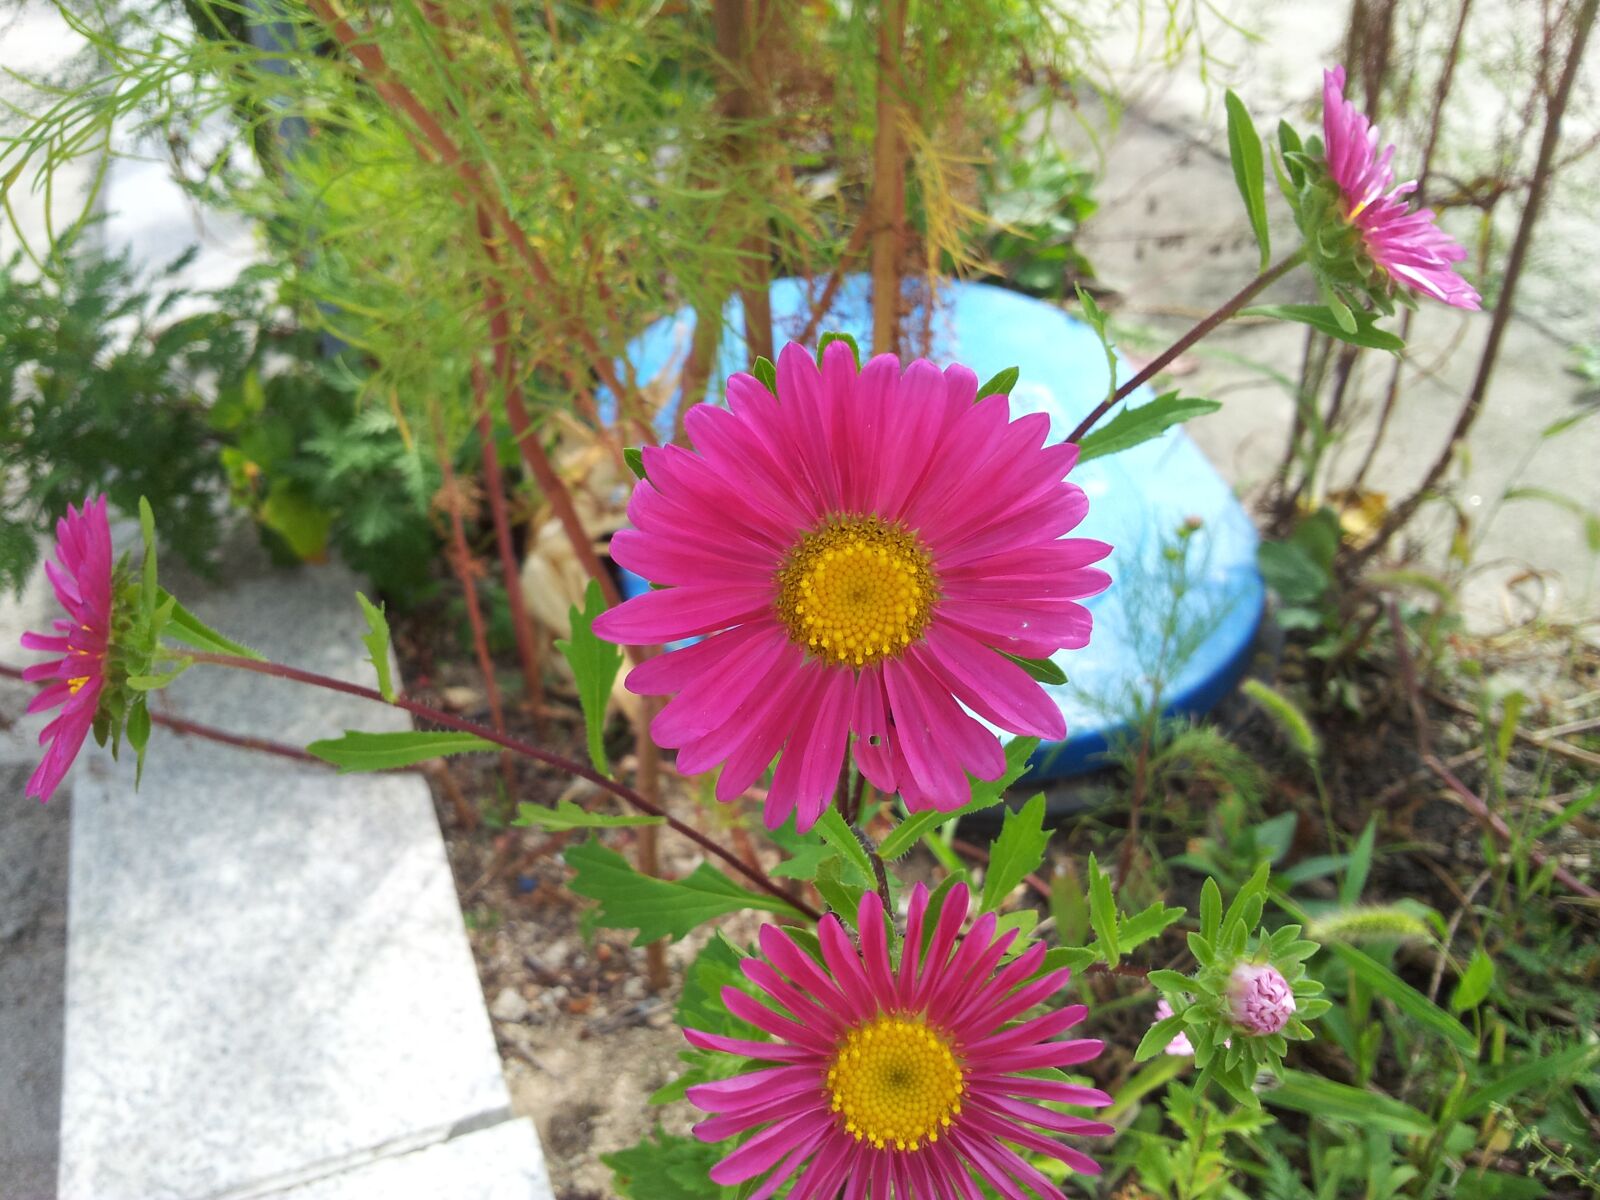 Samsung Galaxy S2 sample photo. Spring, flowers, nature photography